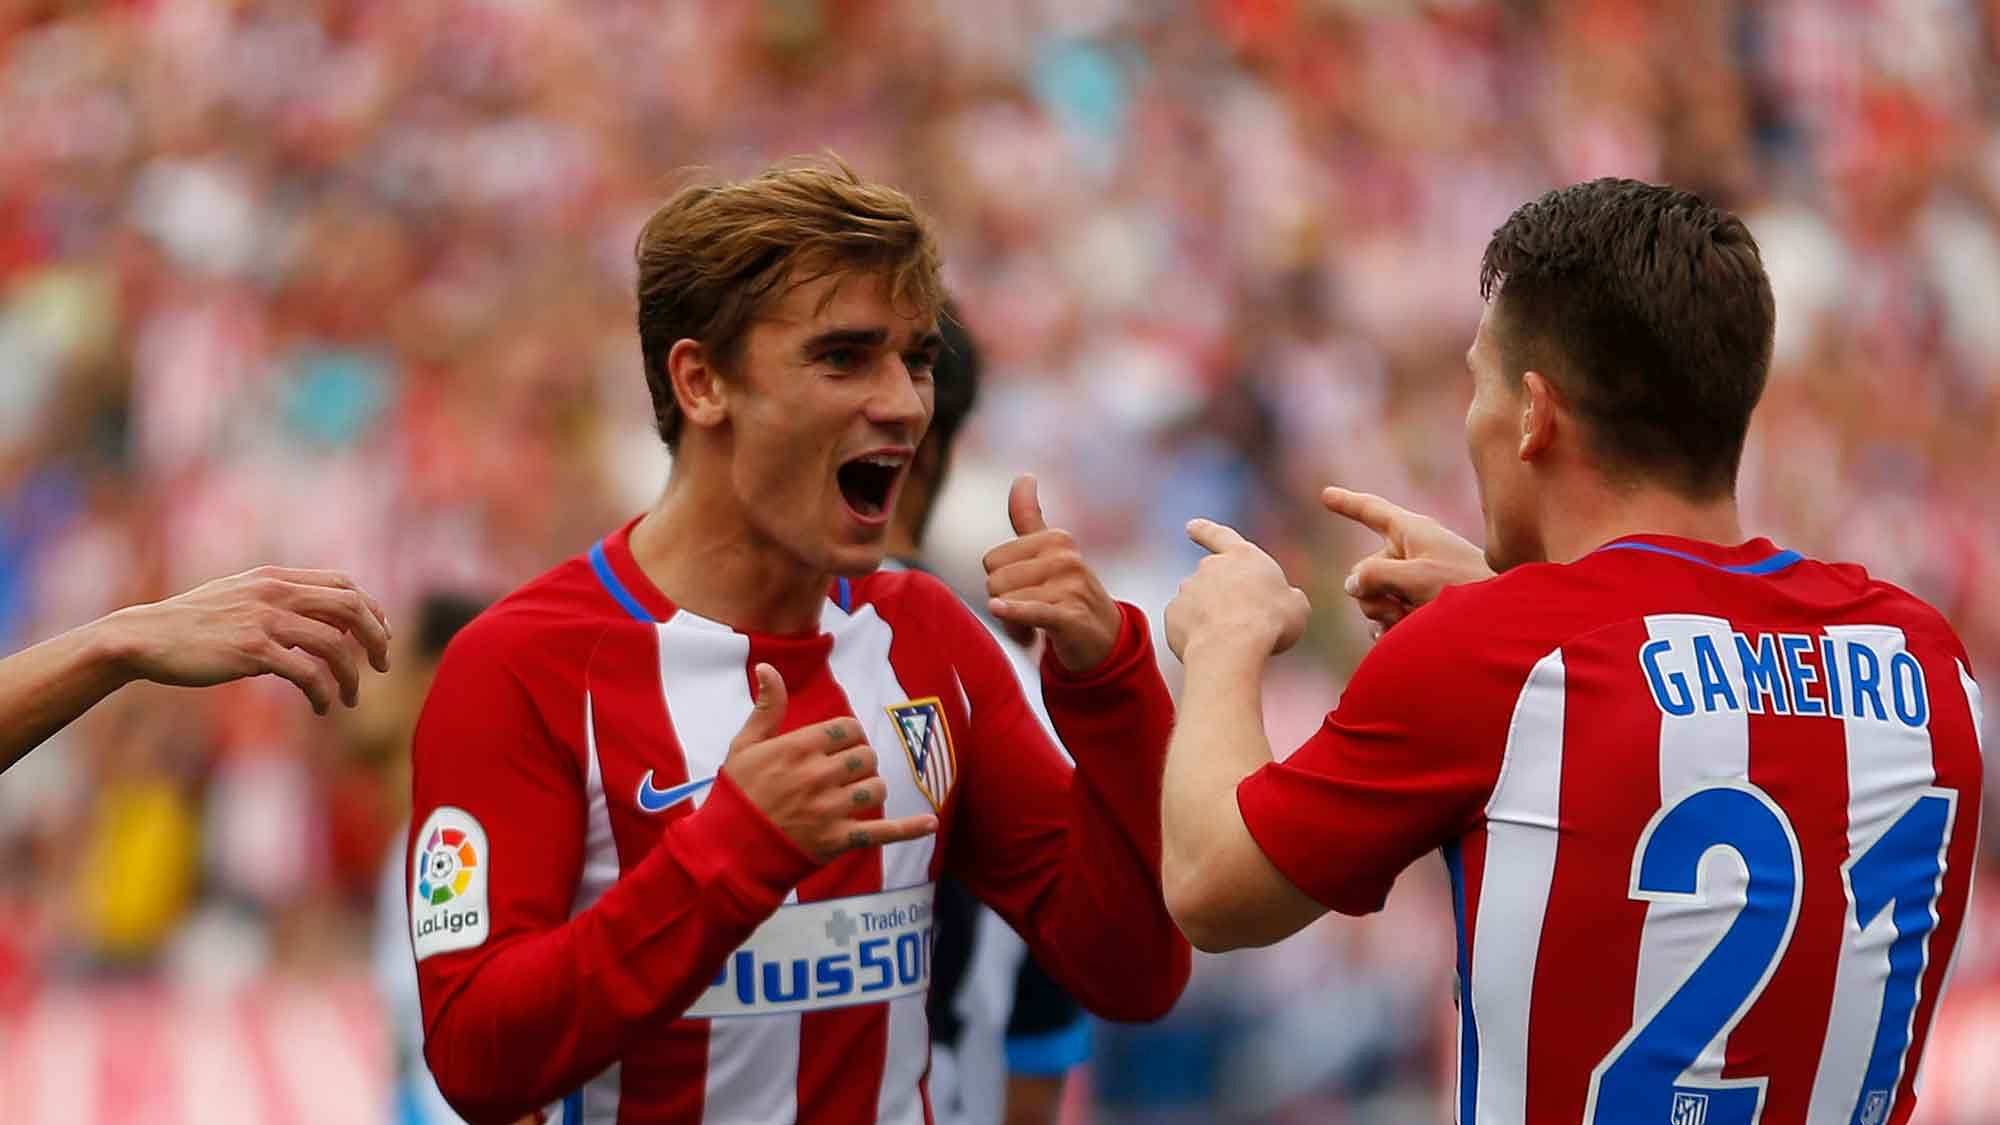 Atletico Madrid’s Antoine Griezmann during a match for the team. (Photo: AP)